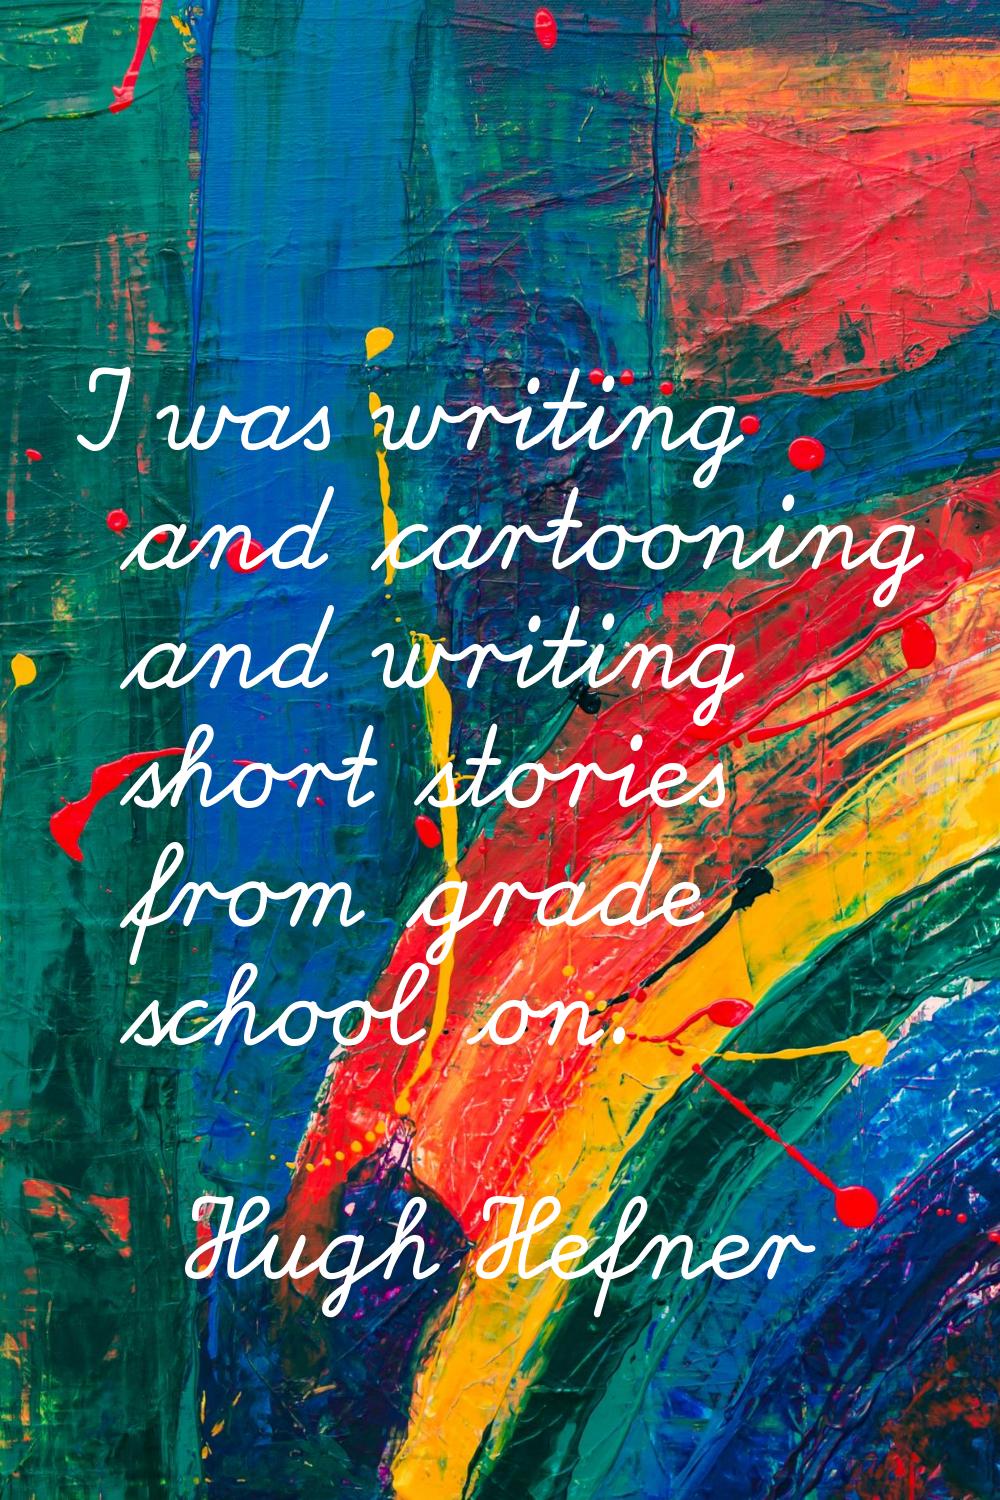 I was writing and cartooning and writing short stories from grade school on.